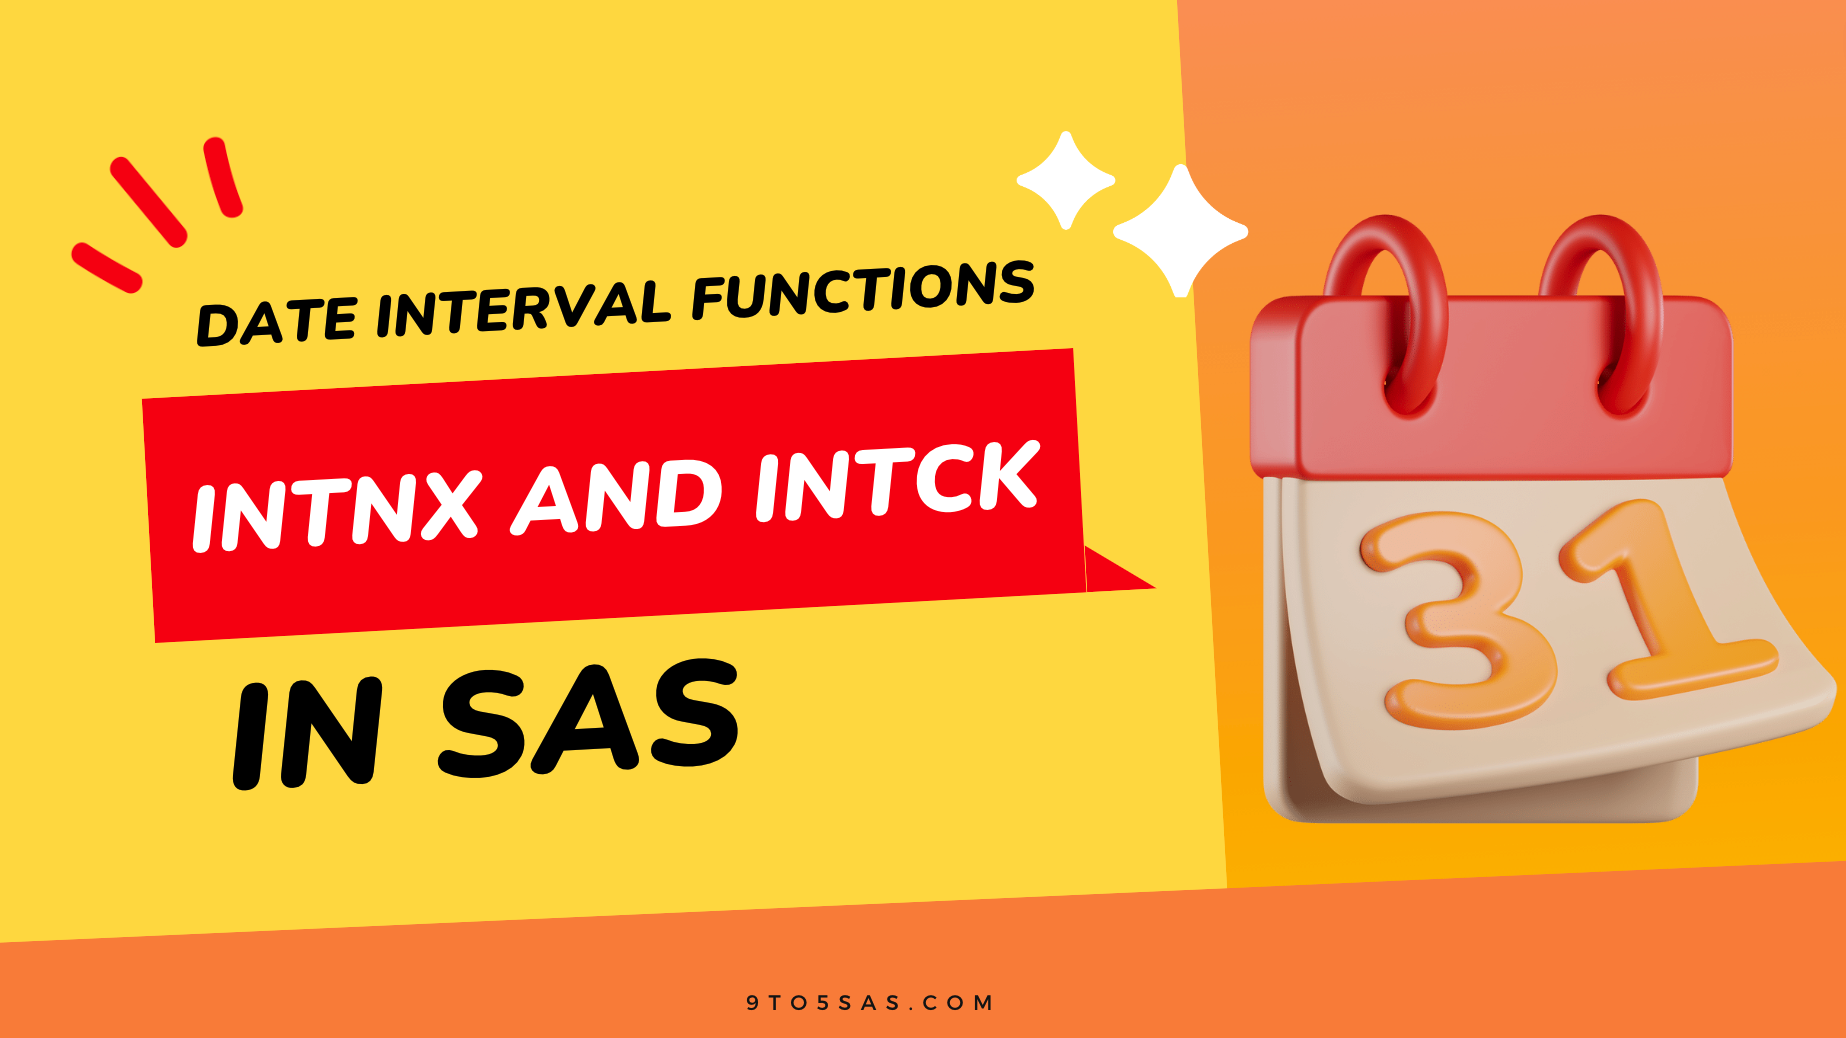 Date Interval Functions – INTNX and INTCK in SAS